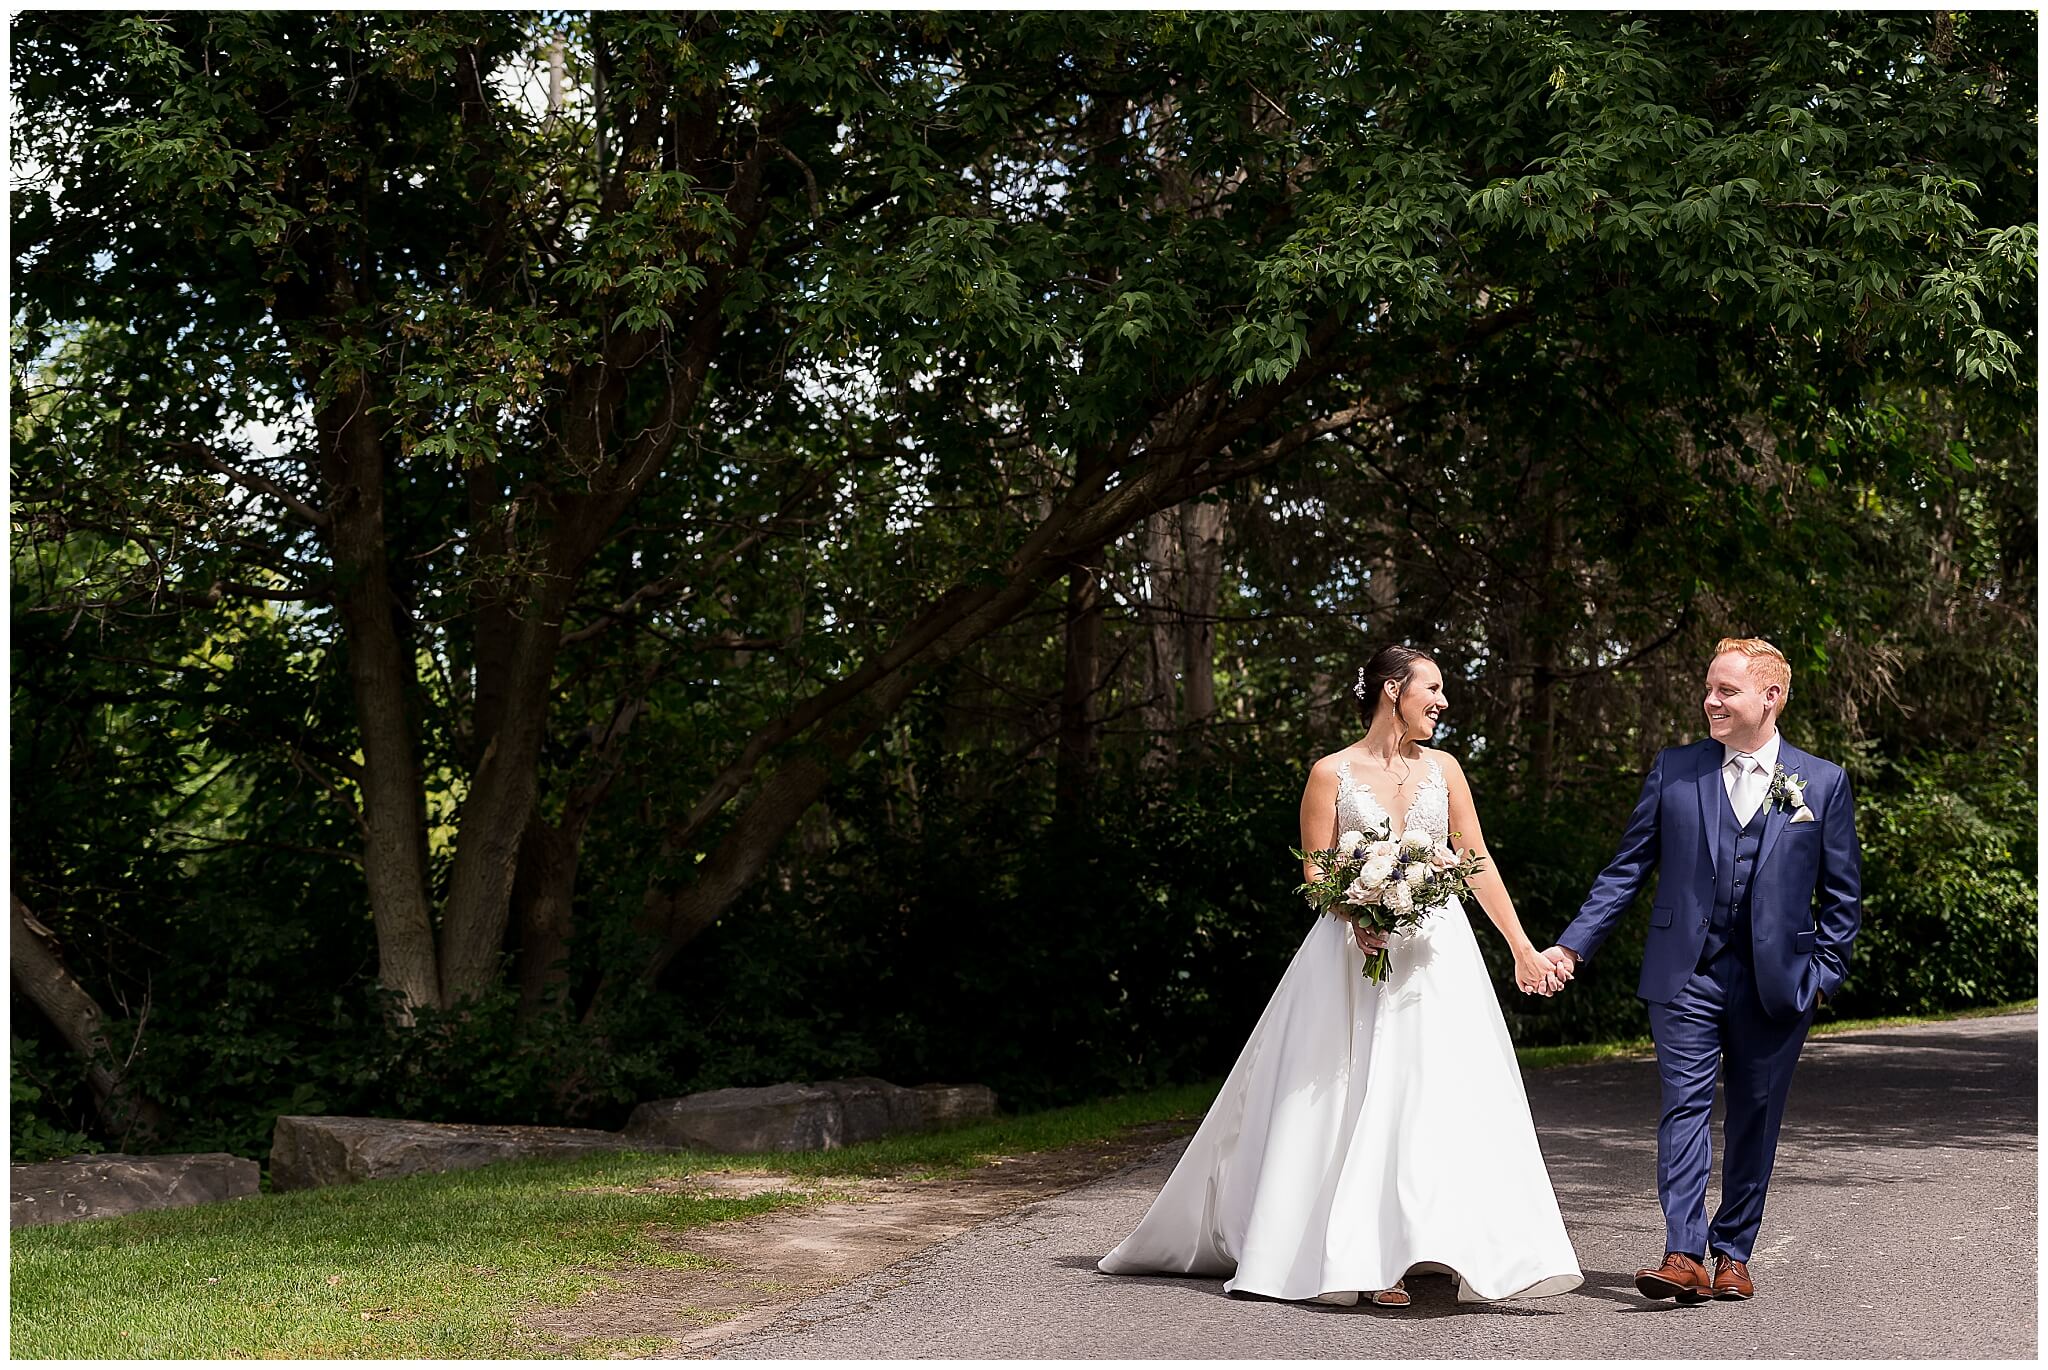 a bride holding a bouquet walks hand in hand with her groom in a blue suit on the grounds of The Marshes wedding venue